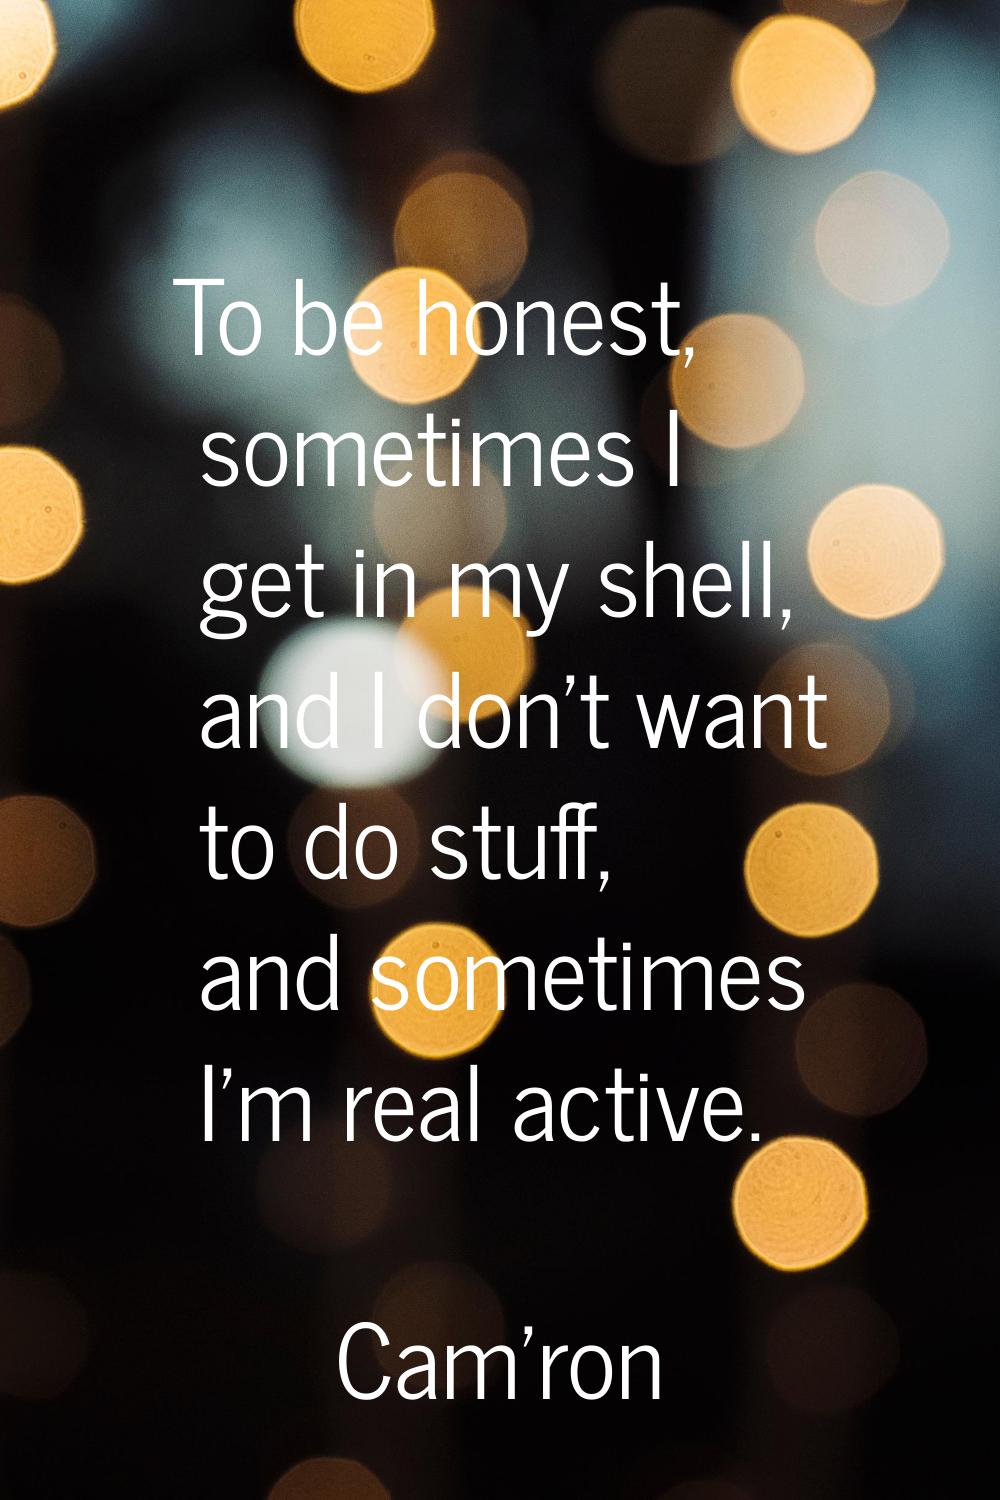 To be honest, sometimes I get in my shell, and I don't want to do stuff, and sometimes I'm real act